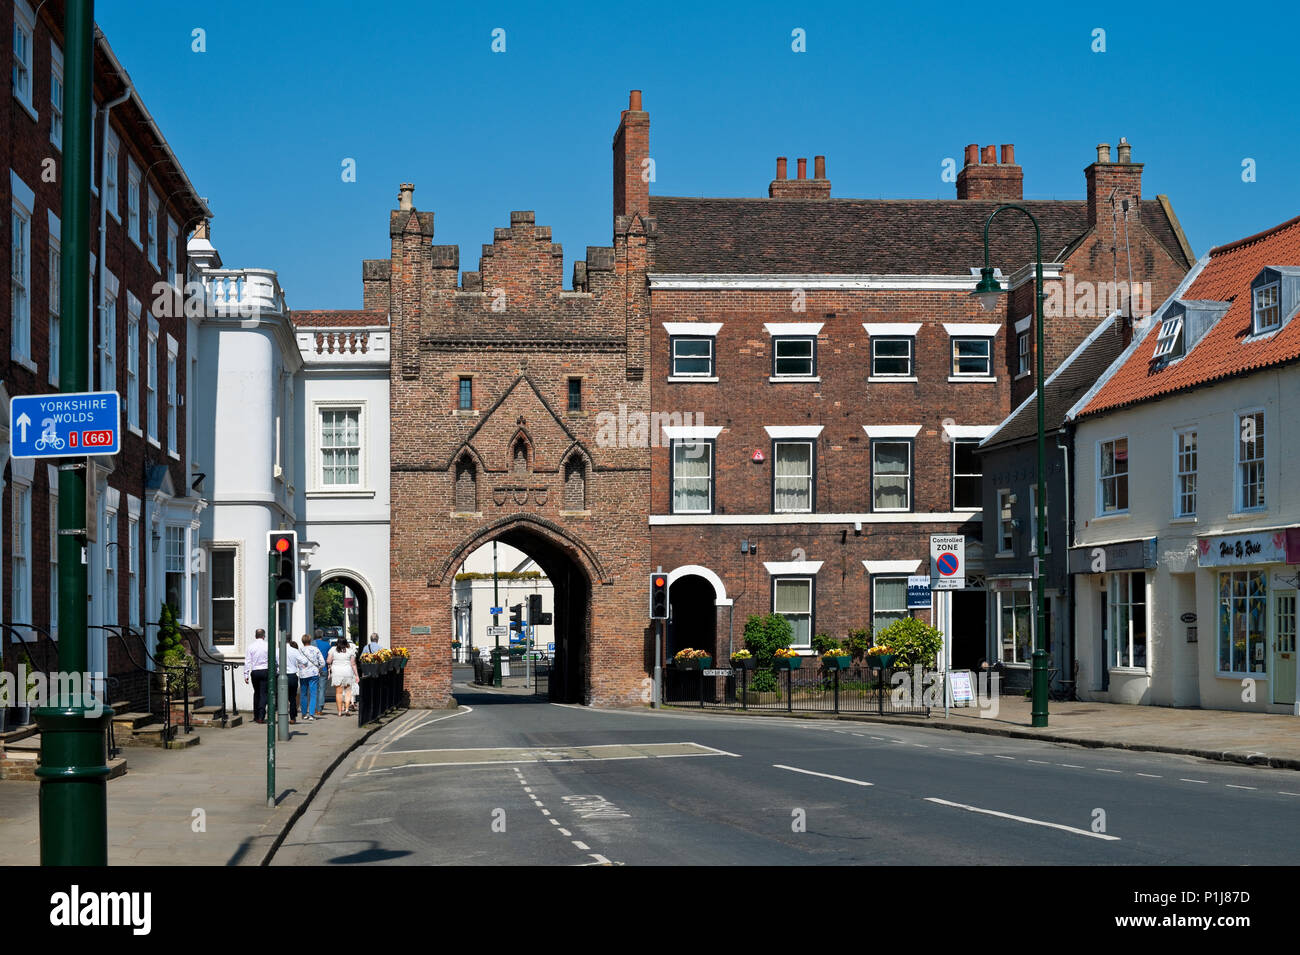 North Bar Within in spring Beverley town centre East Yorkshire England UK United Kingdom GB Great Britain Stock Photo